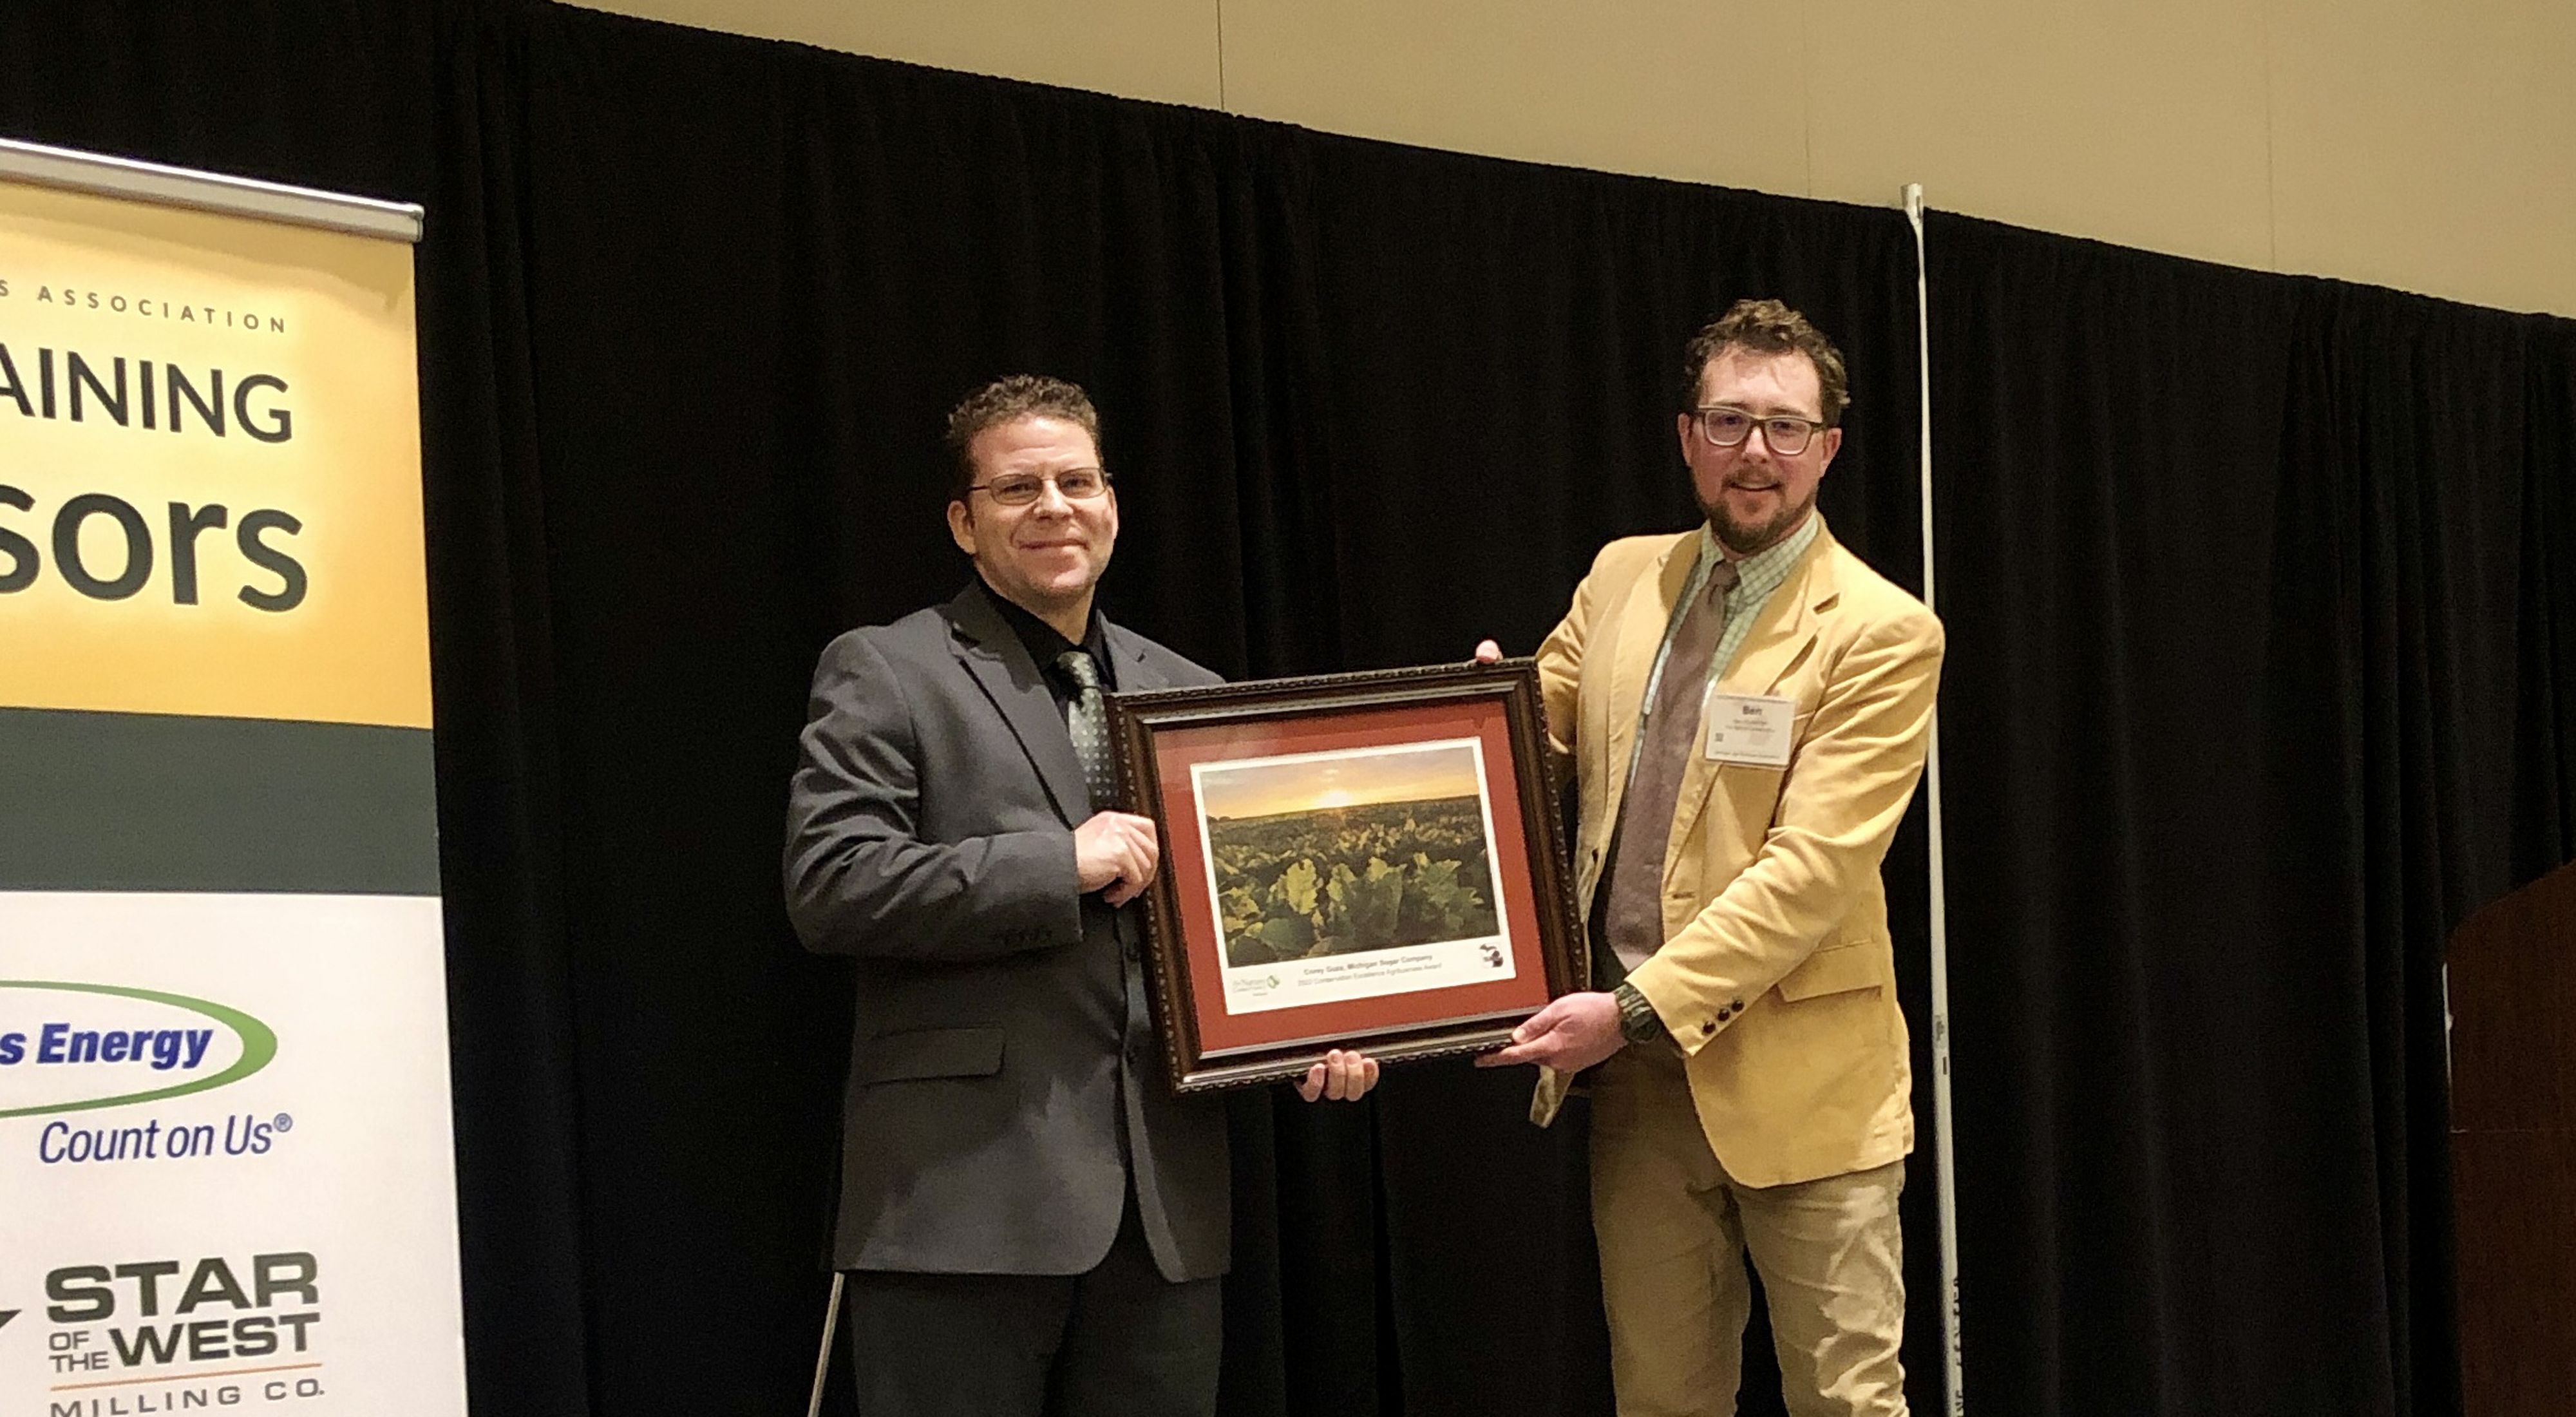 Corey Guza (left) and Ben Wickerham (right) hold the framed agribusiness award.